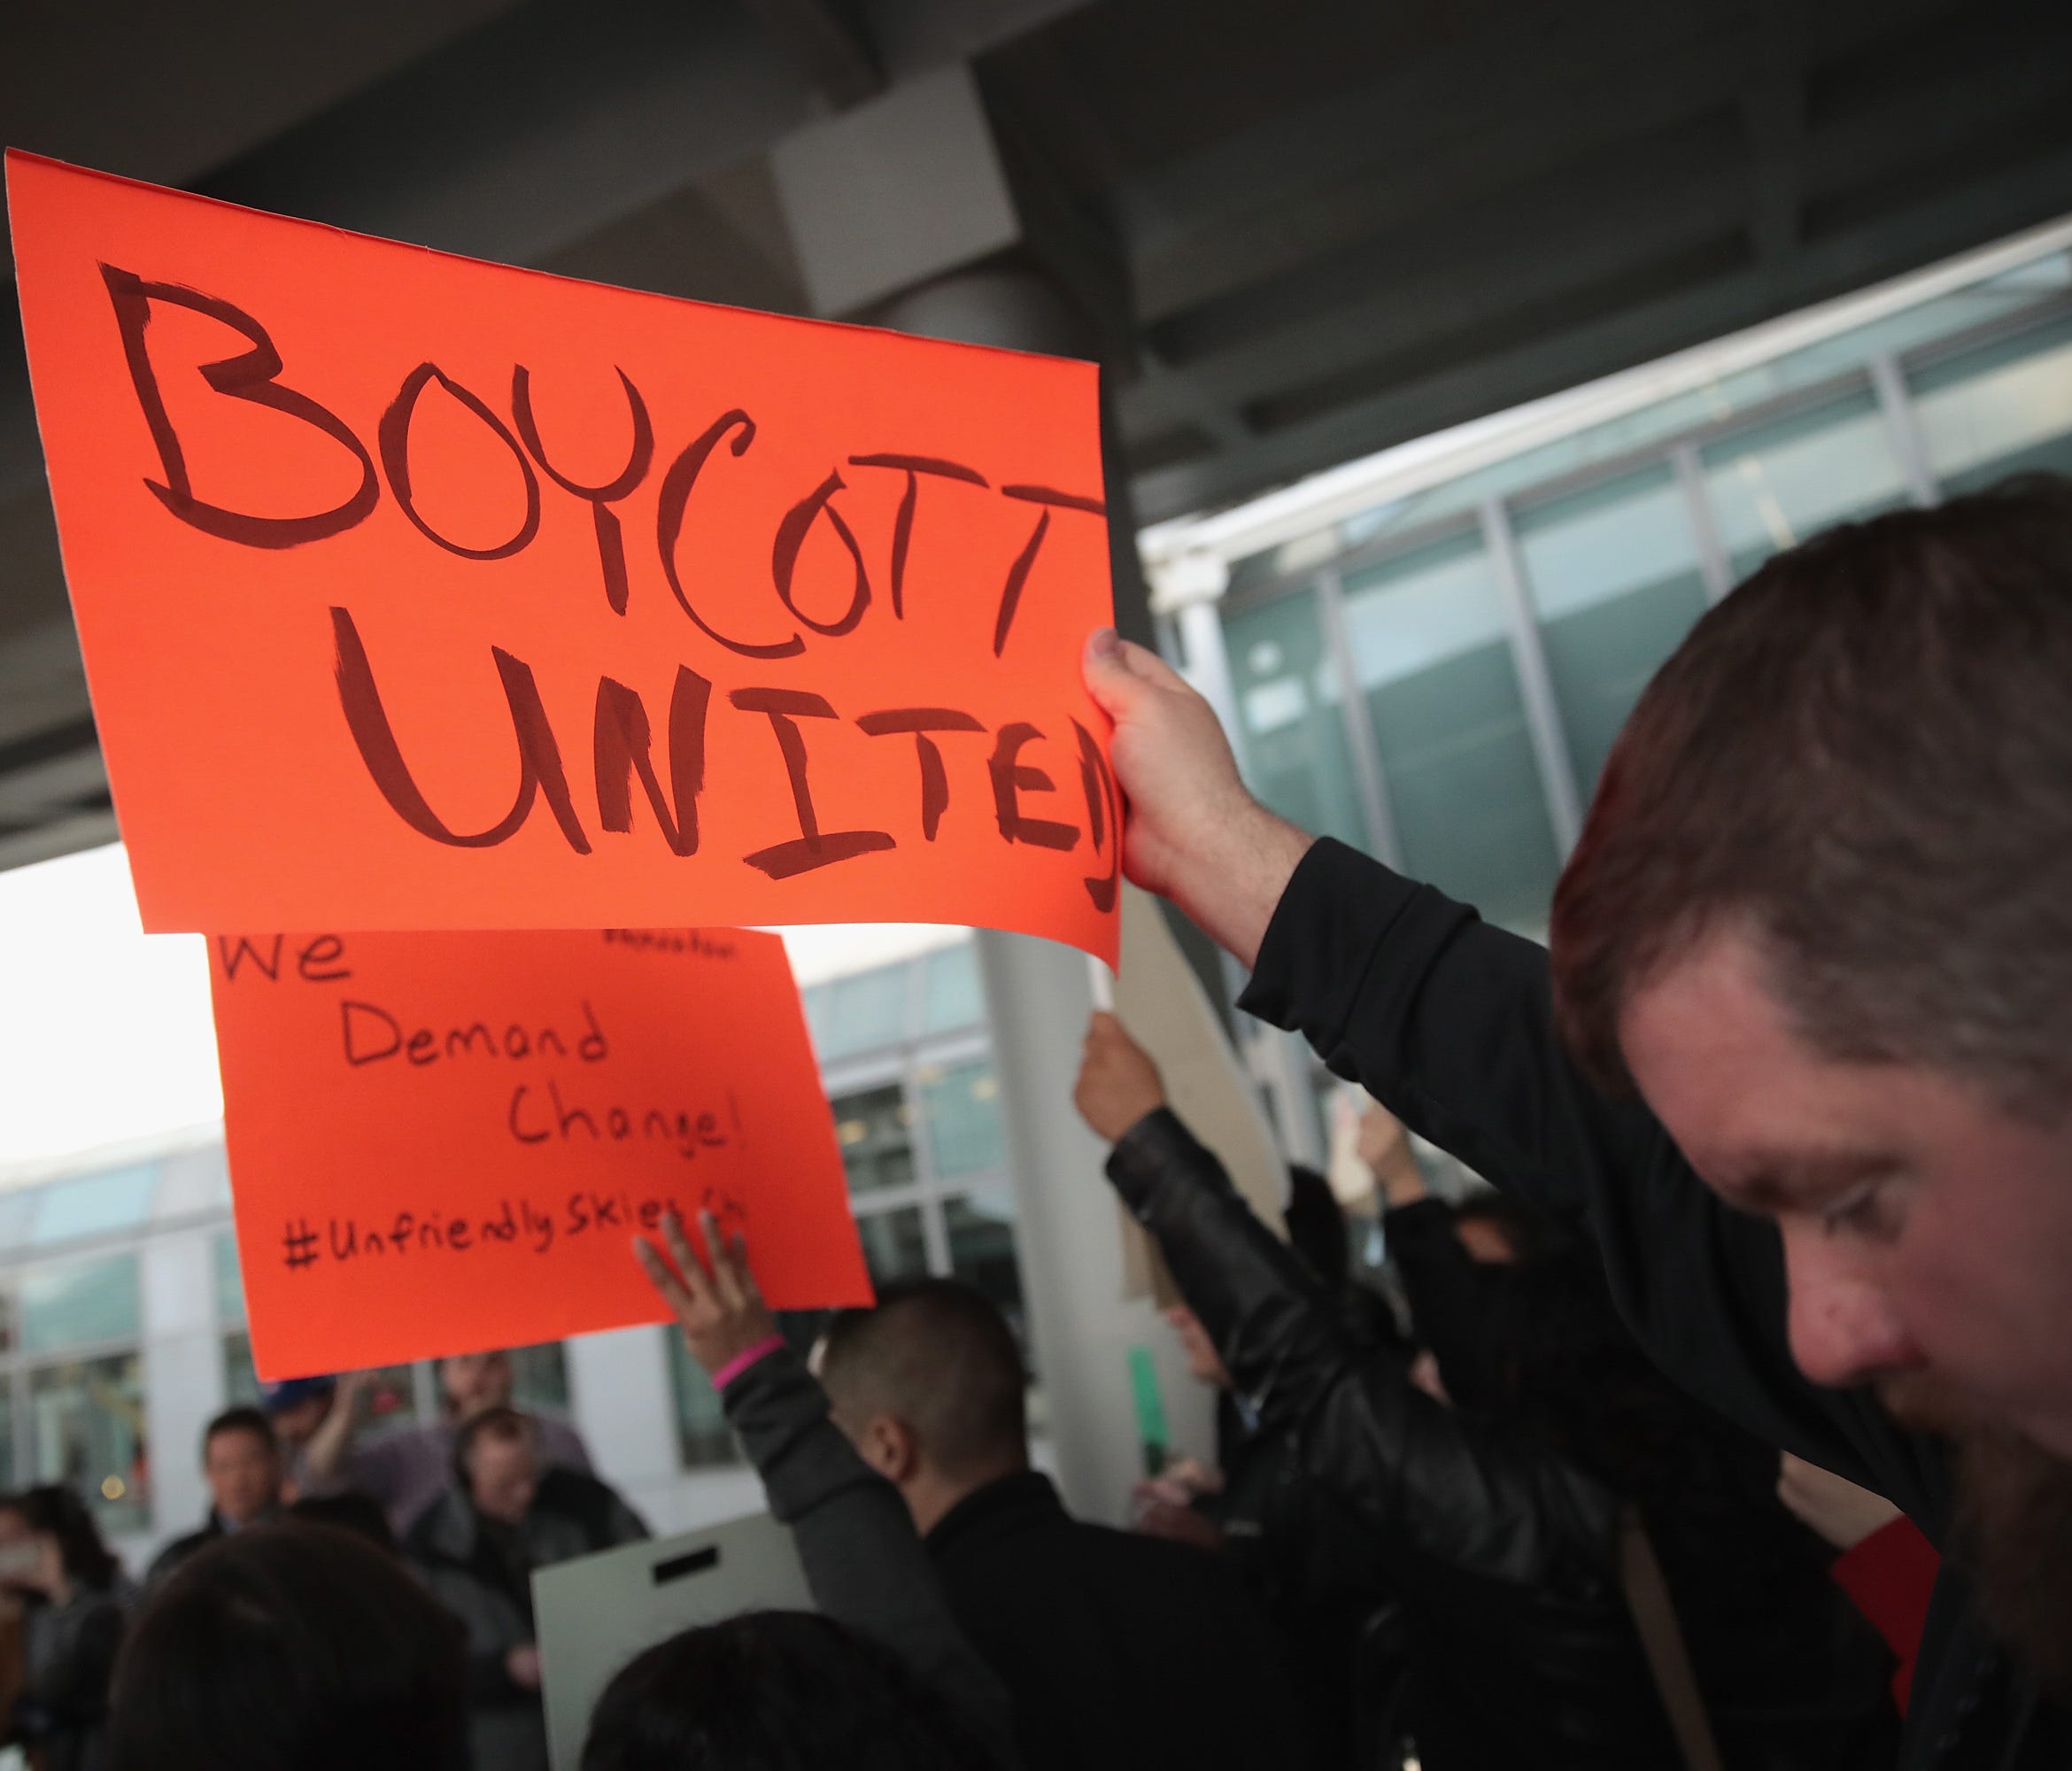 Demonstrators protest outside the United Airlines terminal at Chicago's O'Hare International Airport on April 11, 2017.